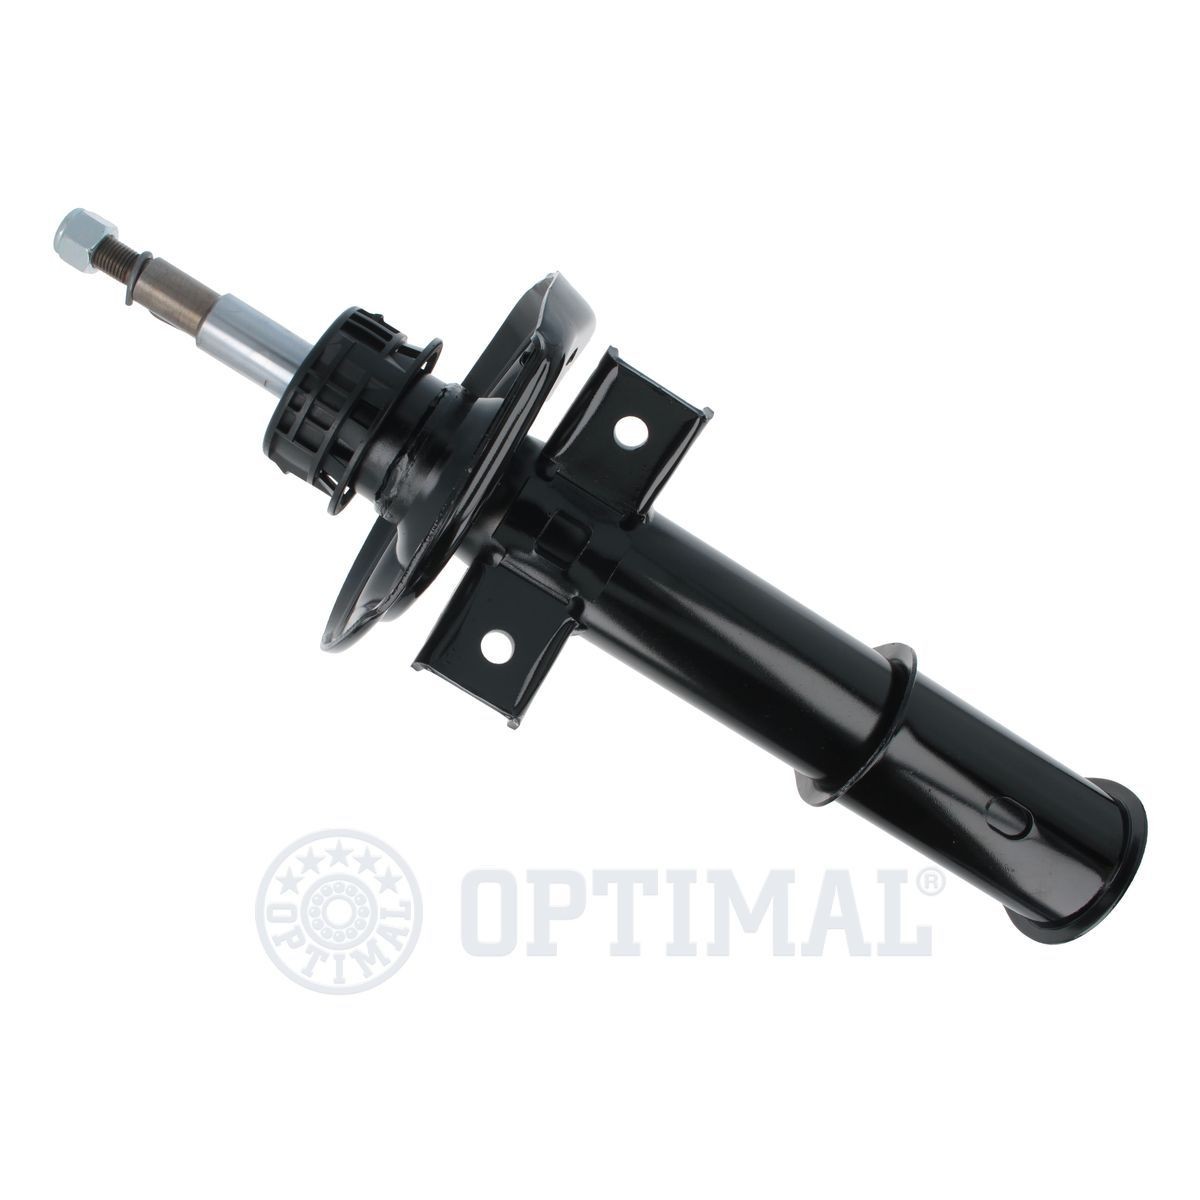 OPTIMAL Front Axle, Gas Pressure, Twin-Tube, Suspension Strut, Top pin, Bottom Clamp, M14x1,5 Shocks A-3997G buy